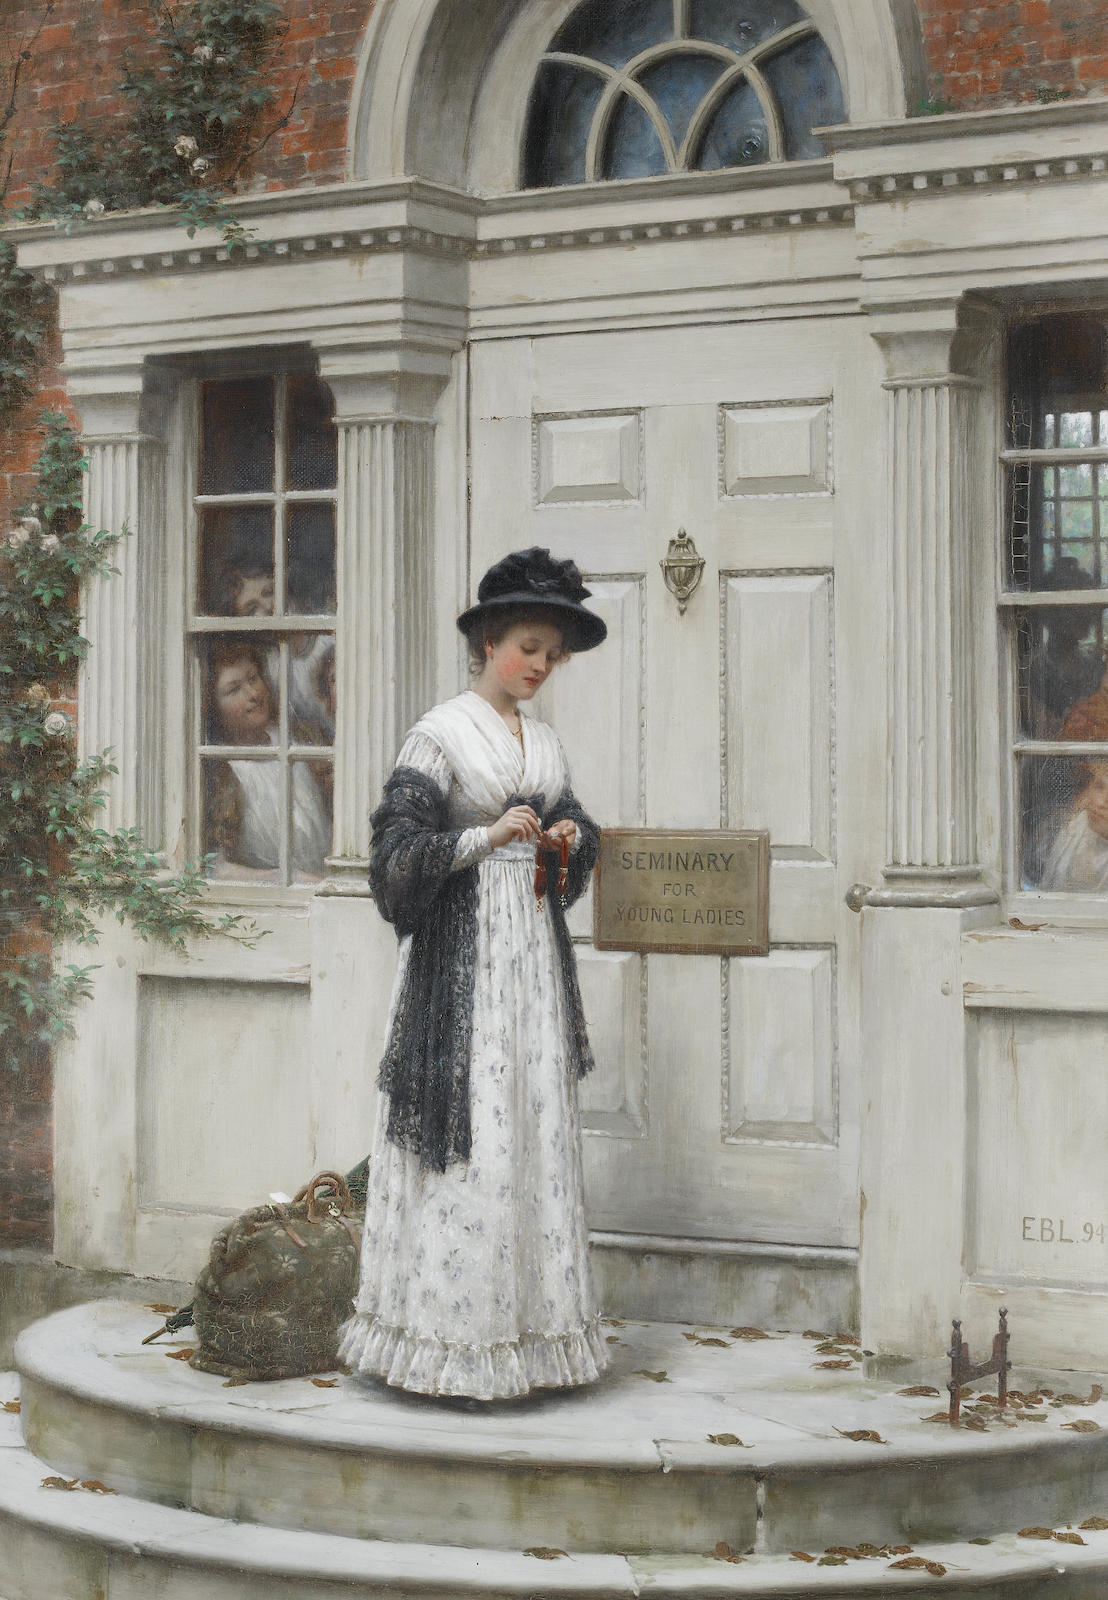 The New Governess by Edmund Blair Leighton - c. 1894 - 57.7 x 39.6 cm private collection